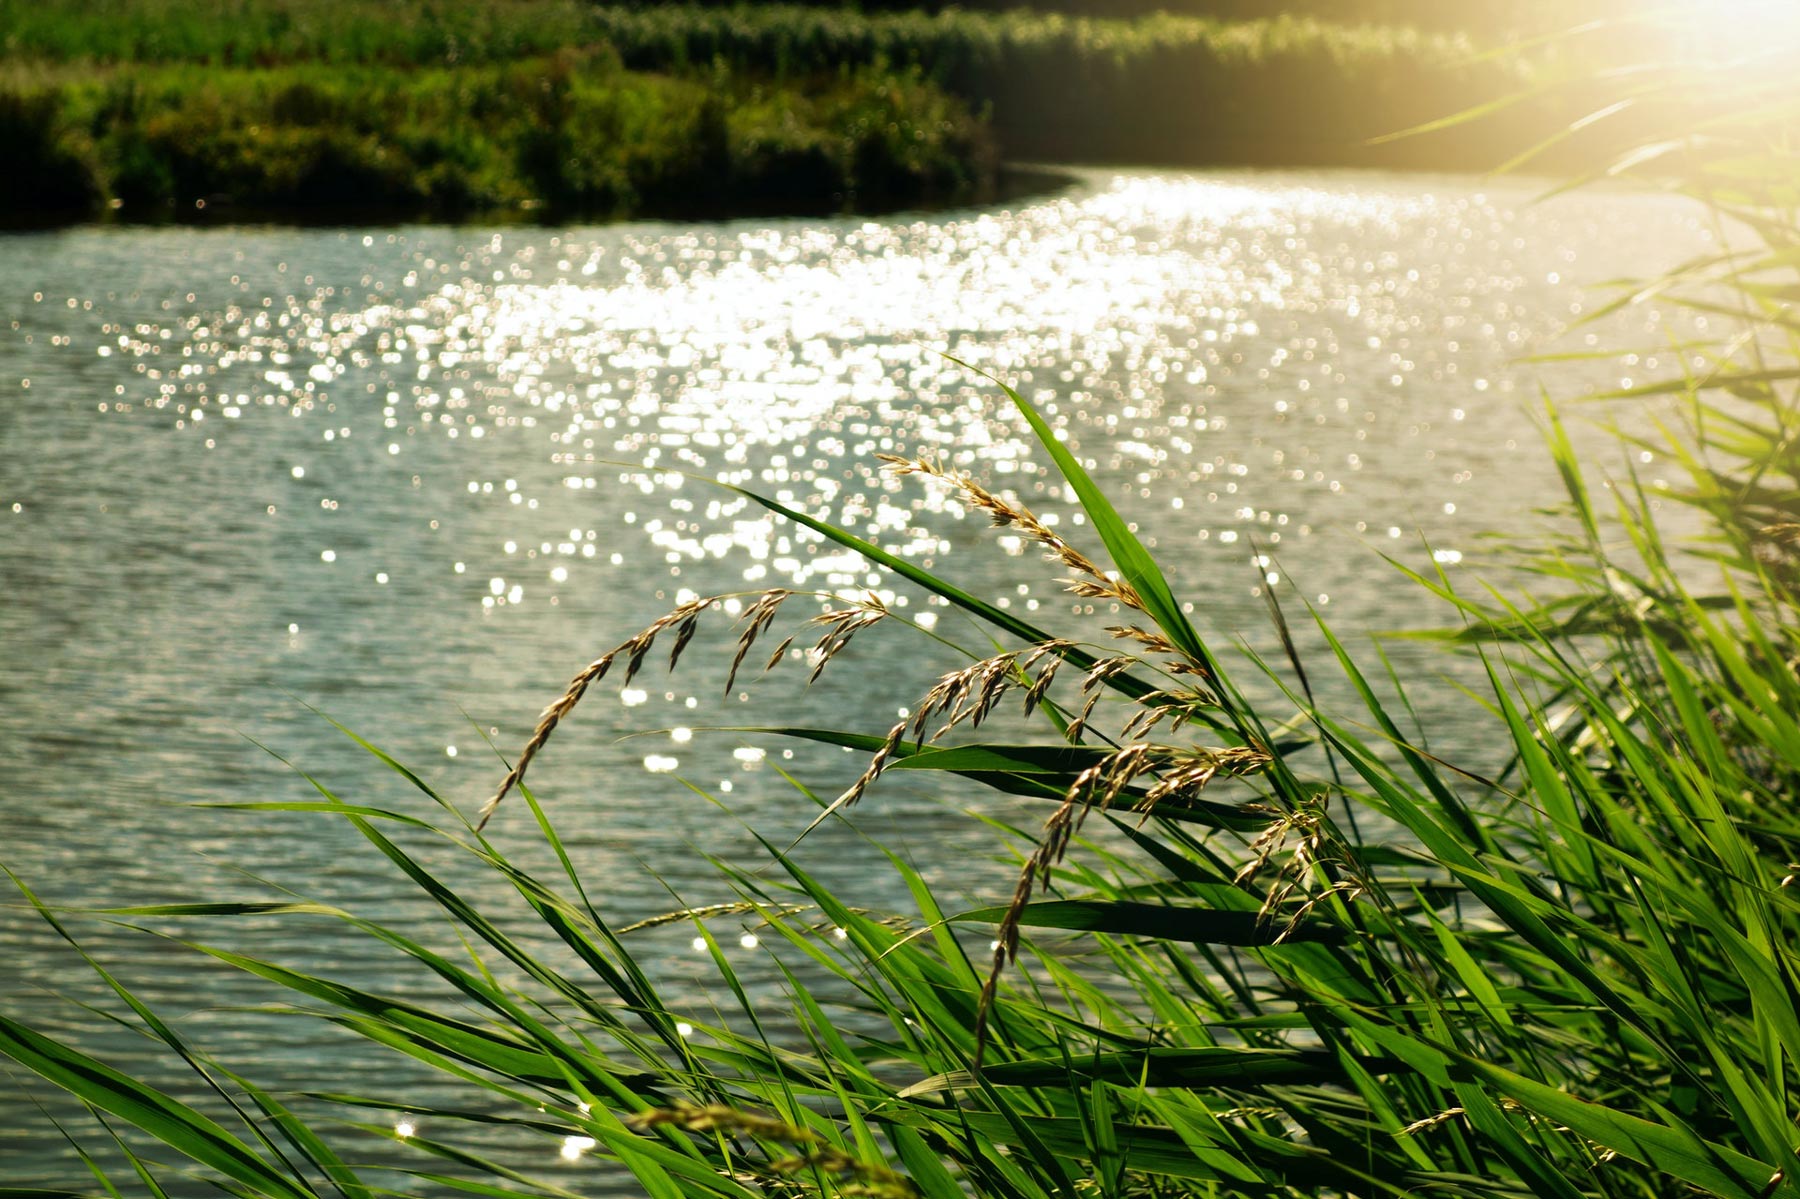 A river with vegetation around it with the sun setting.